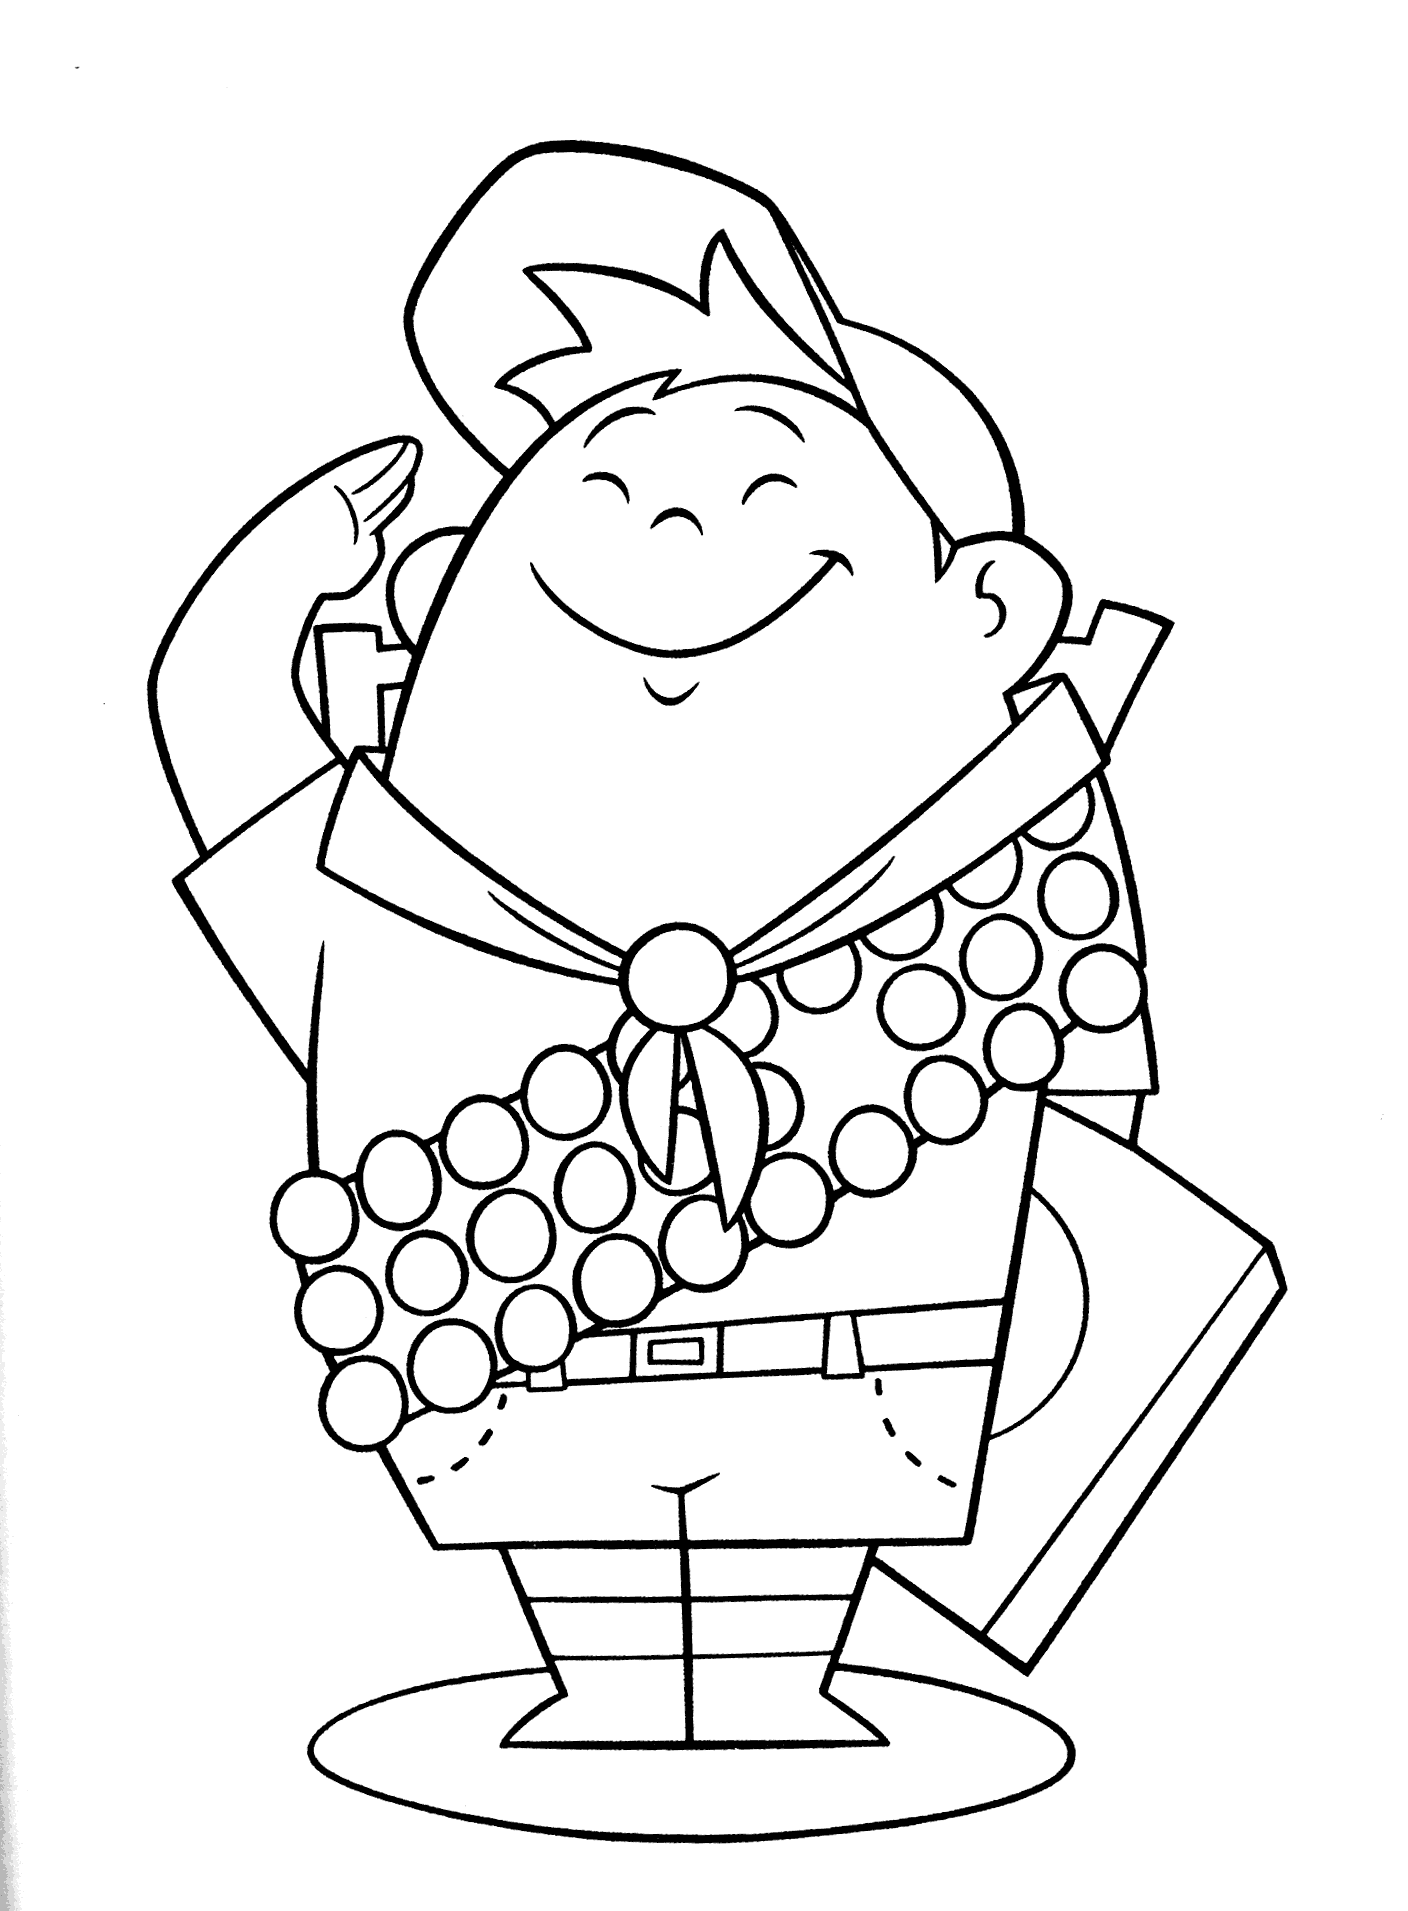 Coloring page - Russell scout